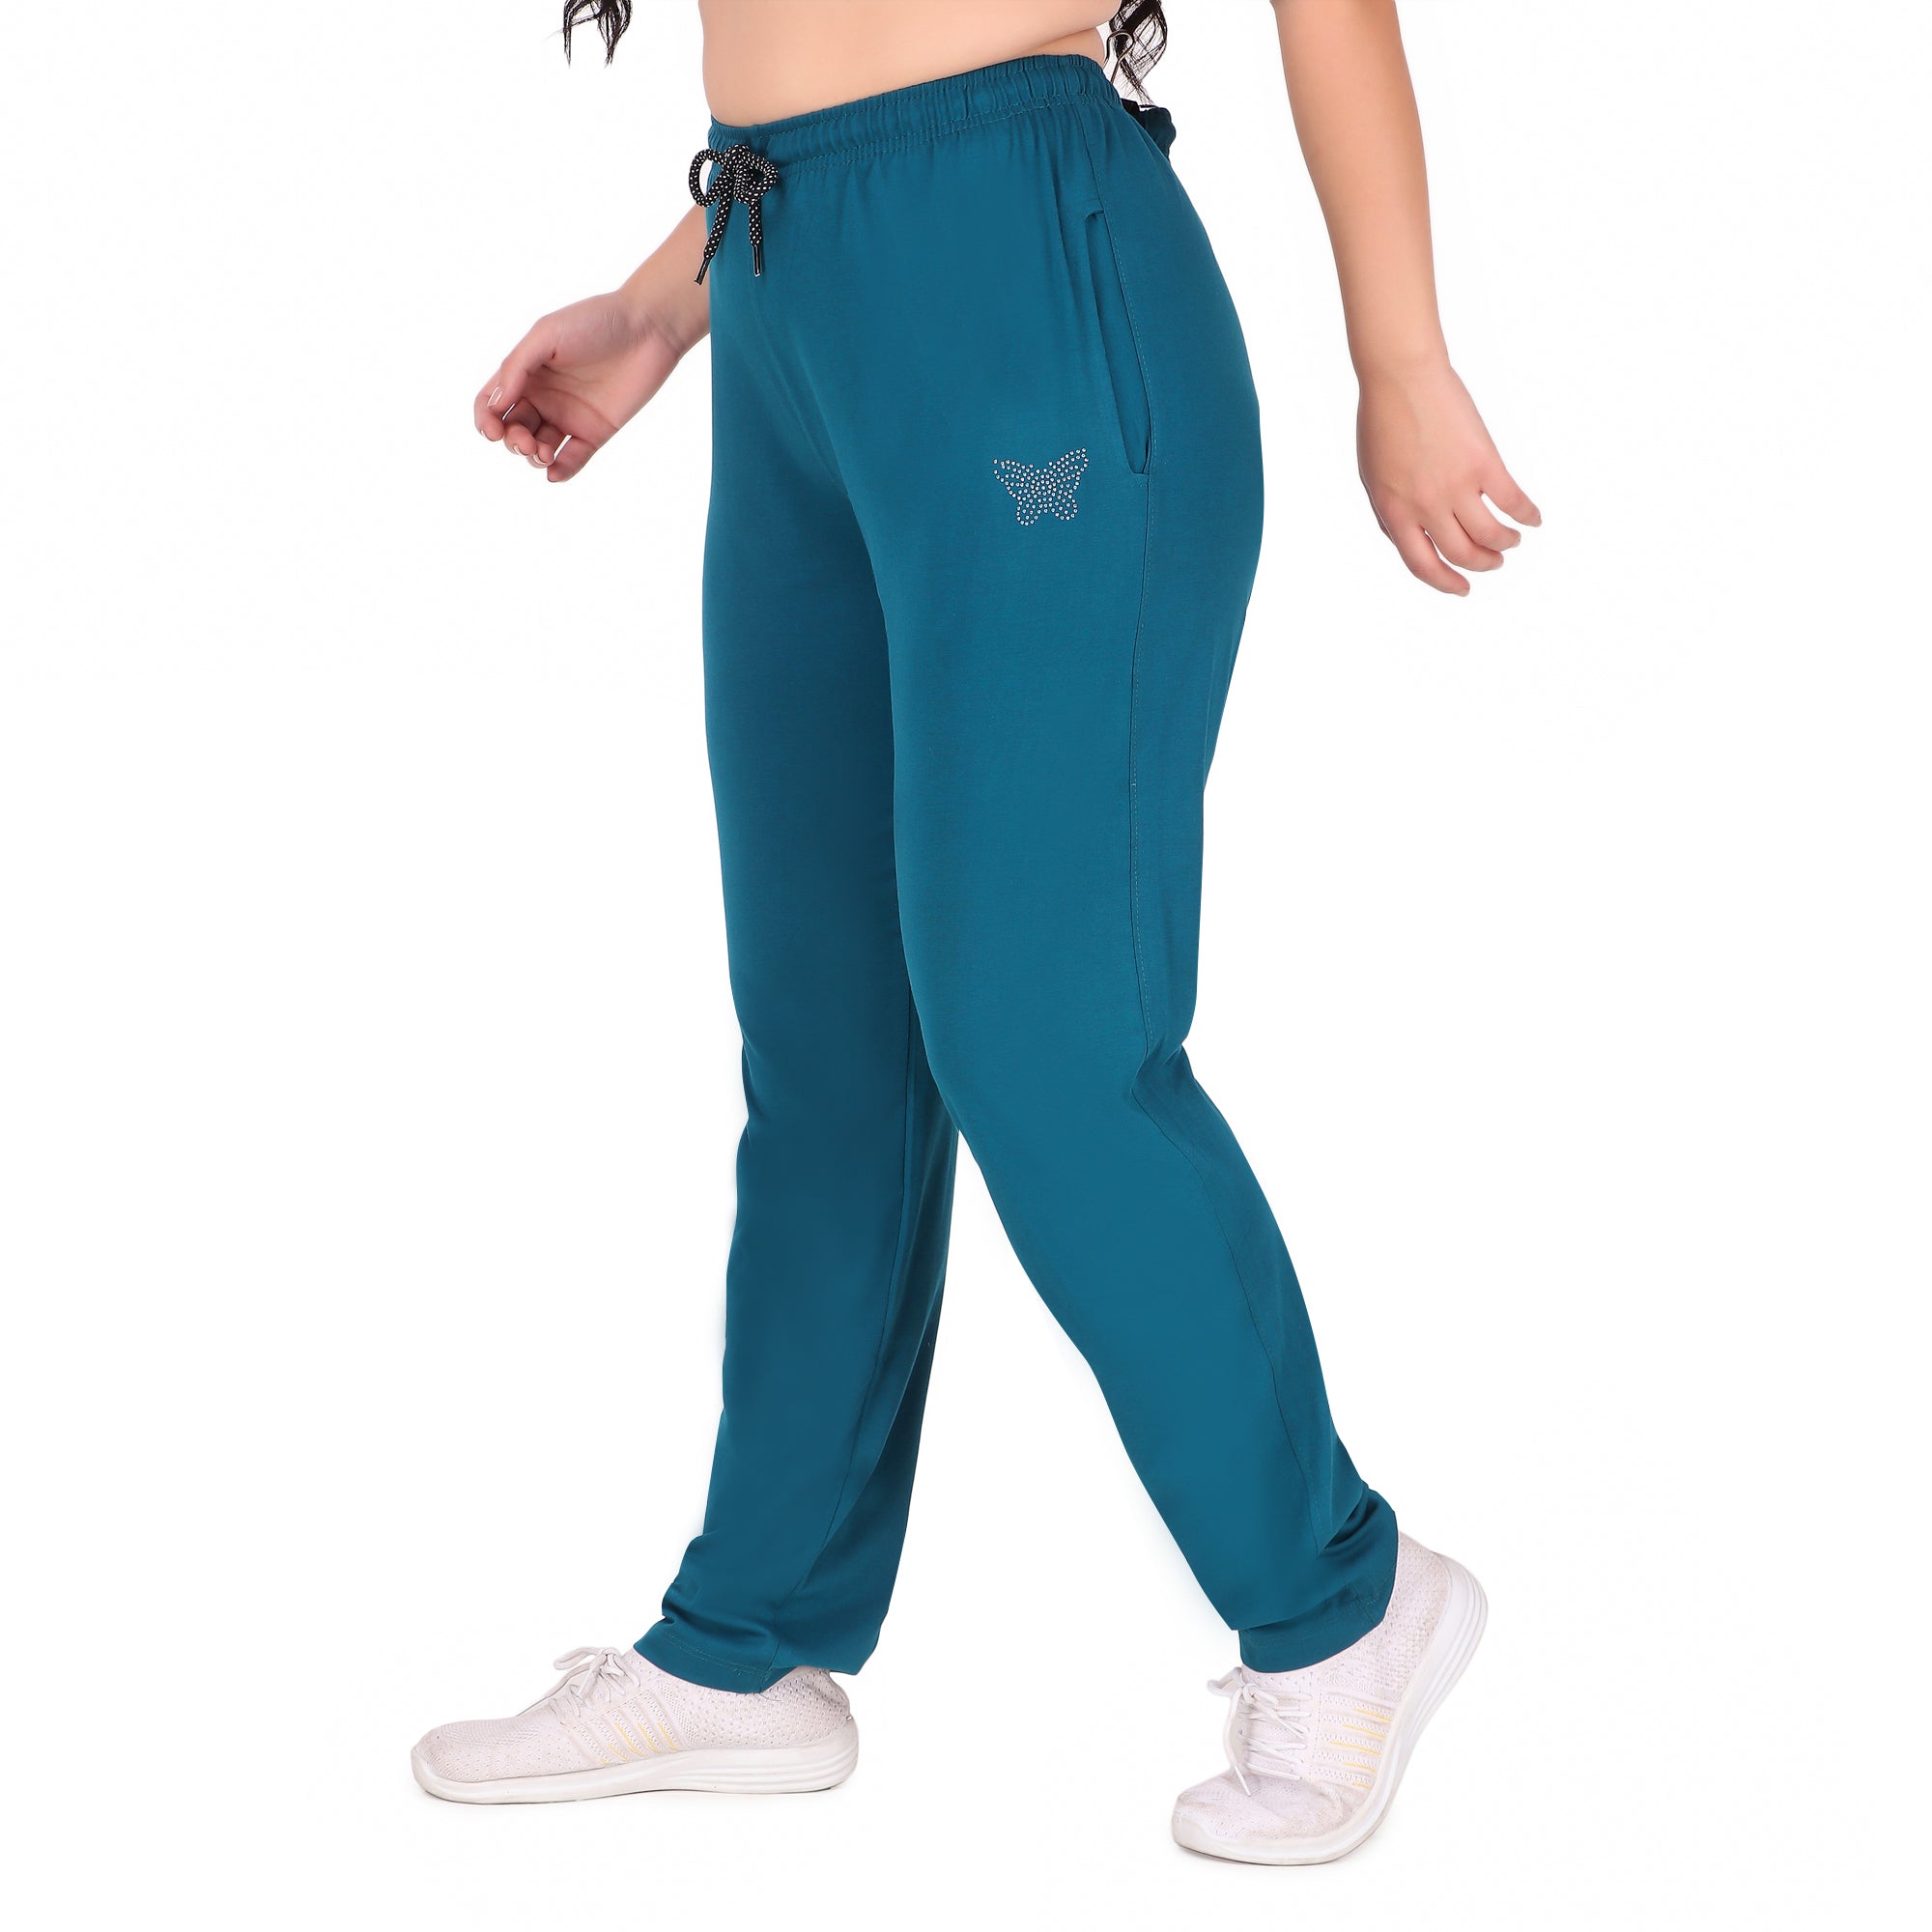 Dry Fit Solid Womens Solid Blue Track Pant womens Cotton Track Pants Joggers Night Wear PajamaSports GymLower Yoga